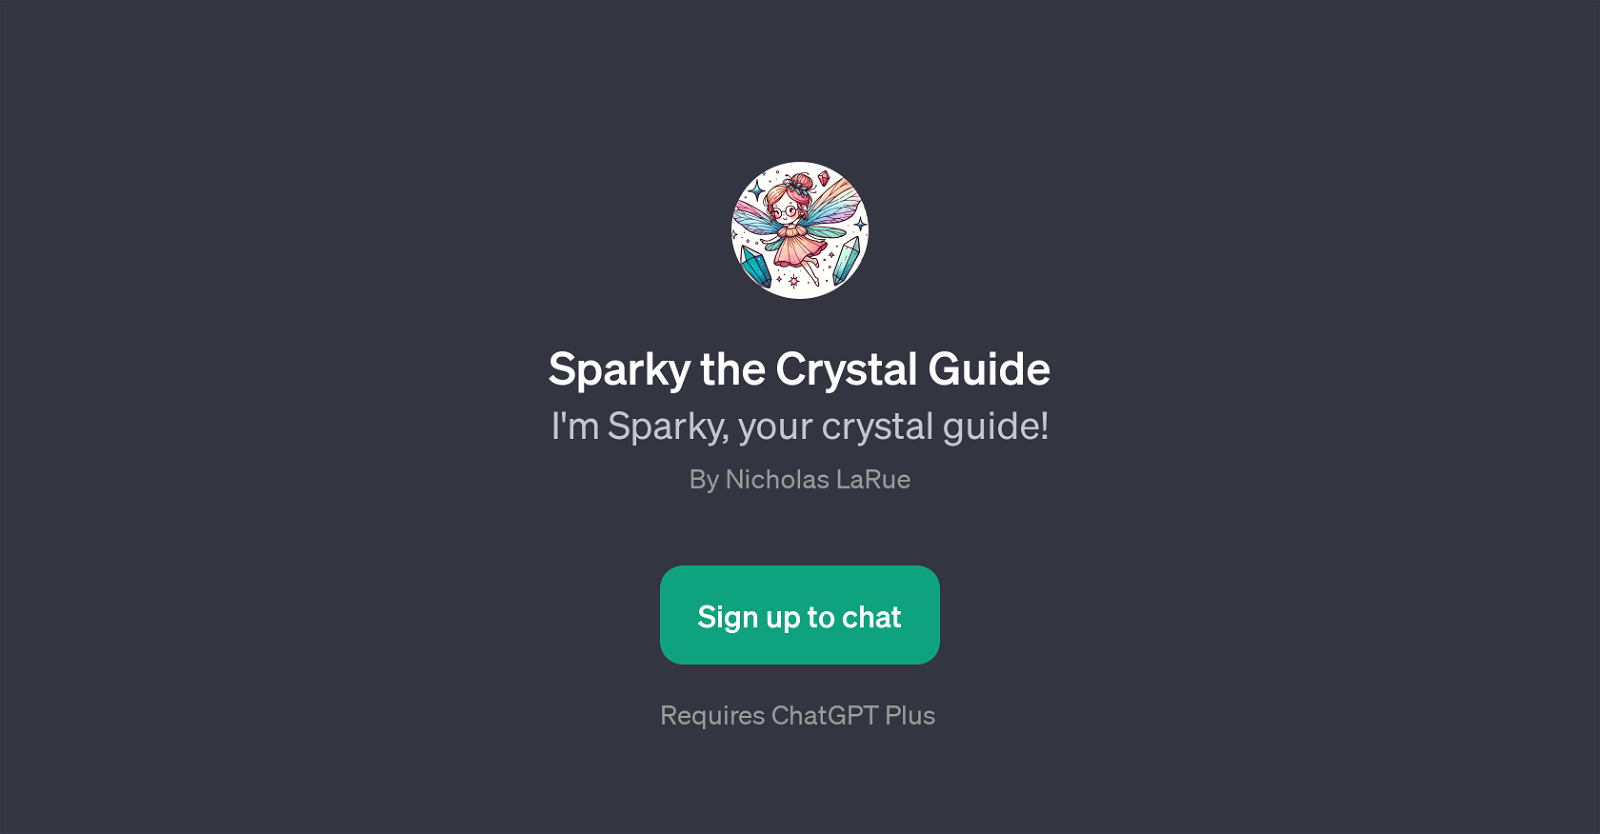 Sparky the Crystal Guide website